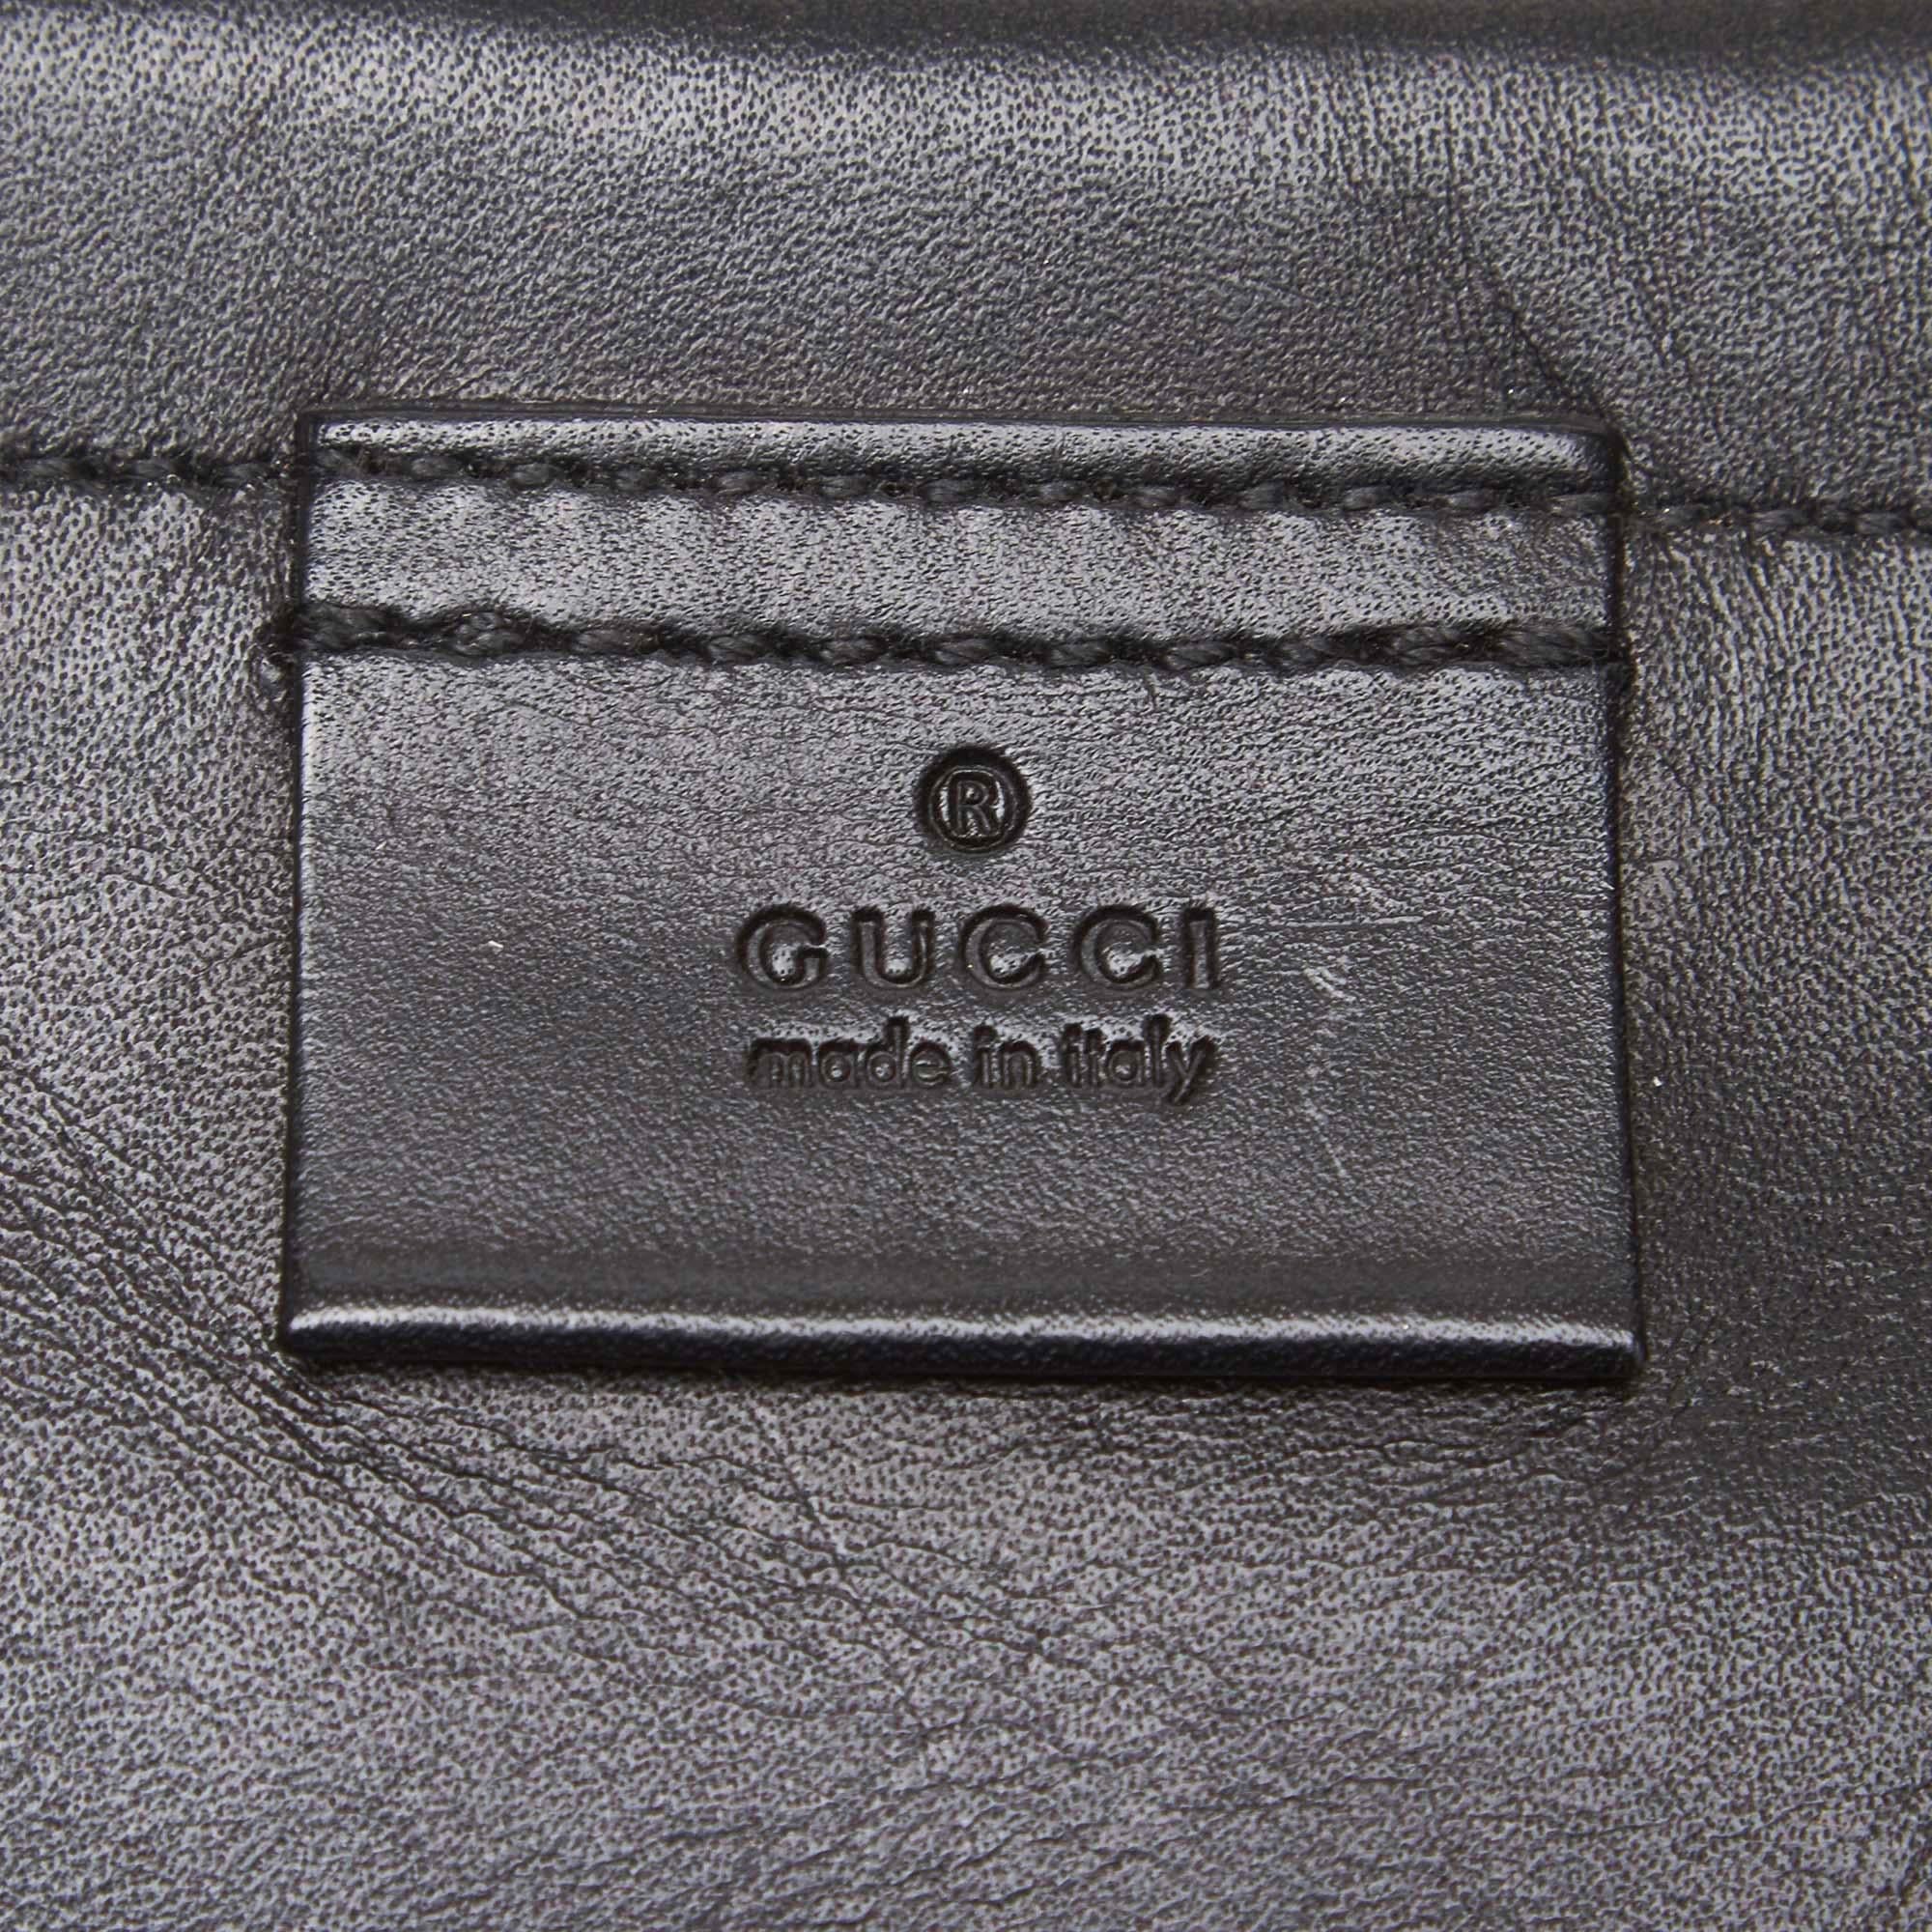 Vintage Authentic Gucci Black Canvas Fabric Tote Bag Italy w/ Dust Bag LARGE  For Sale 2